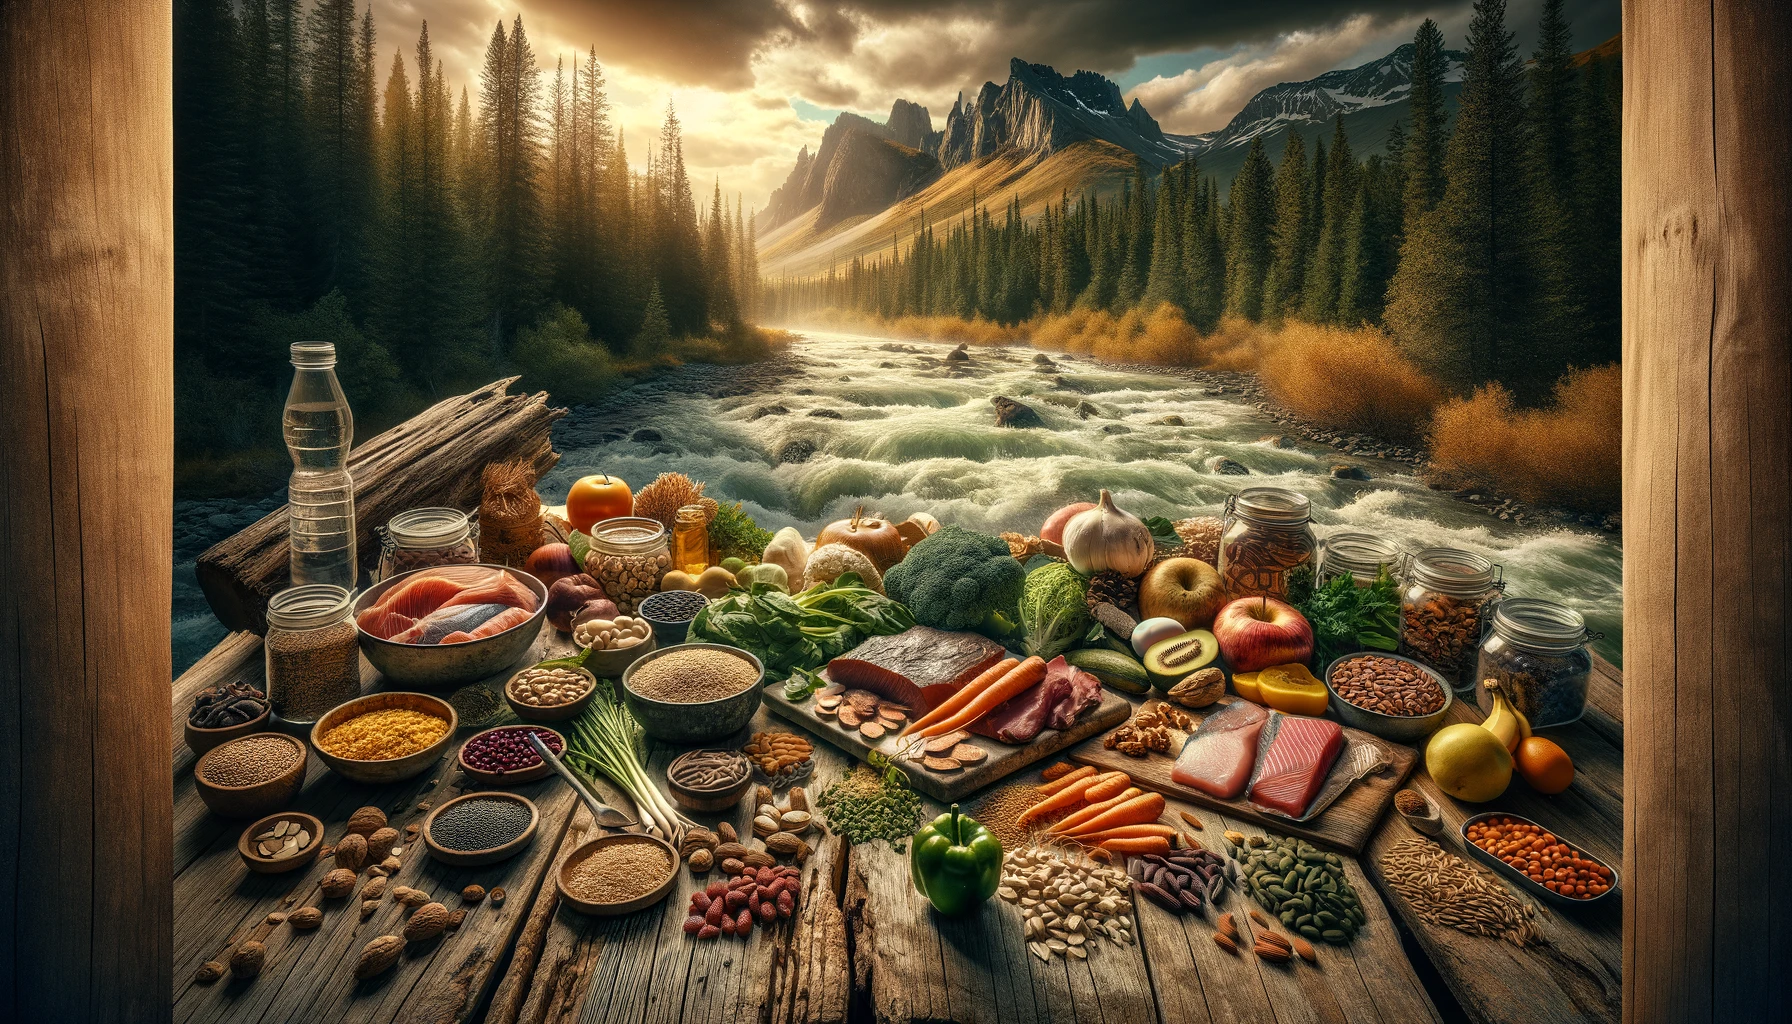 Rustic, survivalist scene with a balanced array of nutritional foods on a wooden table, set against a backdrop of a flowing river, dense forests, and mountains, highlighted by golden hour lighting, symbolizing the journey to nutritional survival